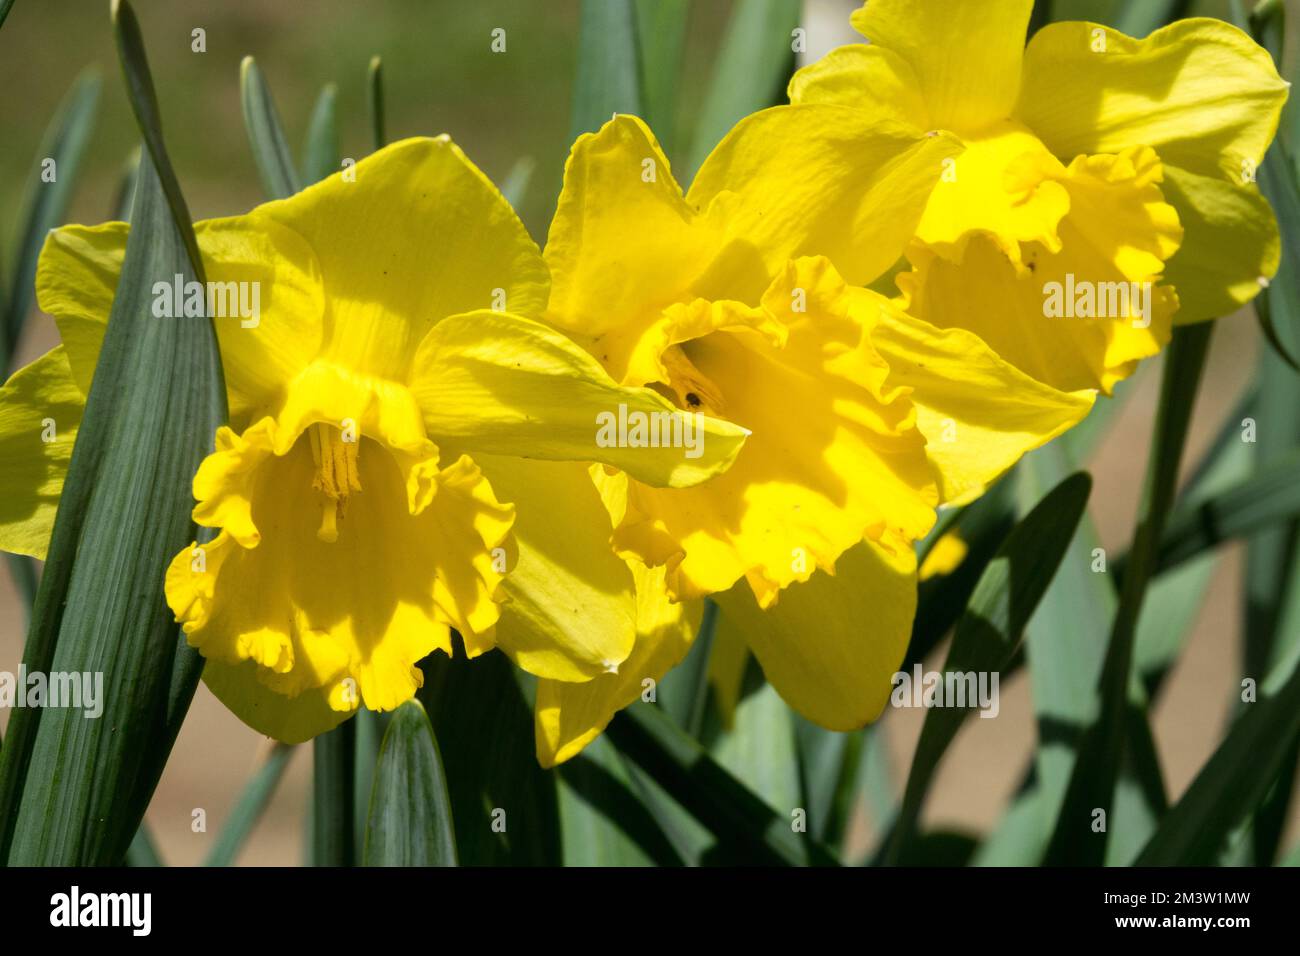 Yellow daffodil Narcissus, Trumpet Daffodil, Spring, Garden, Daffodils Narcissus 'Arkle' Stock Photo